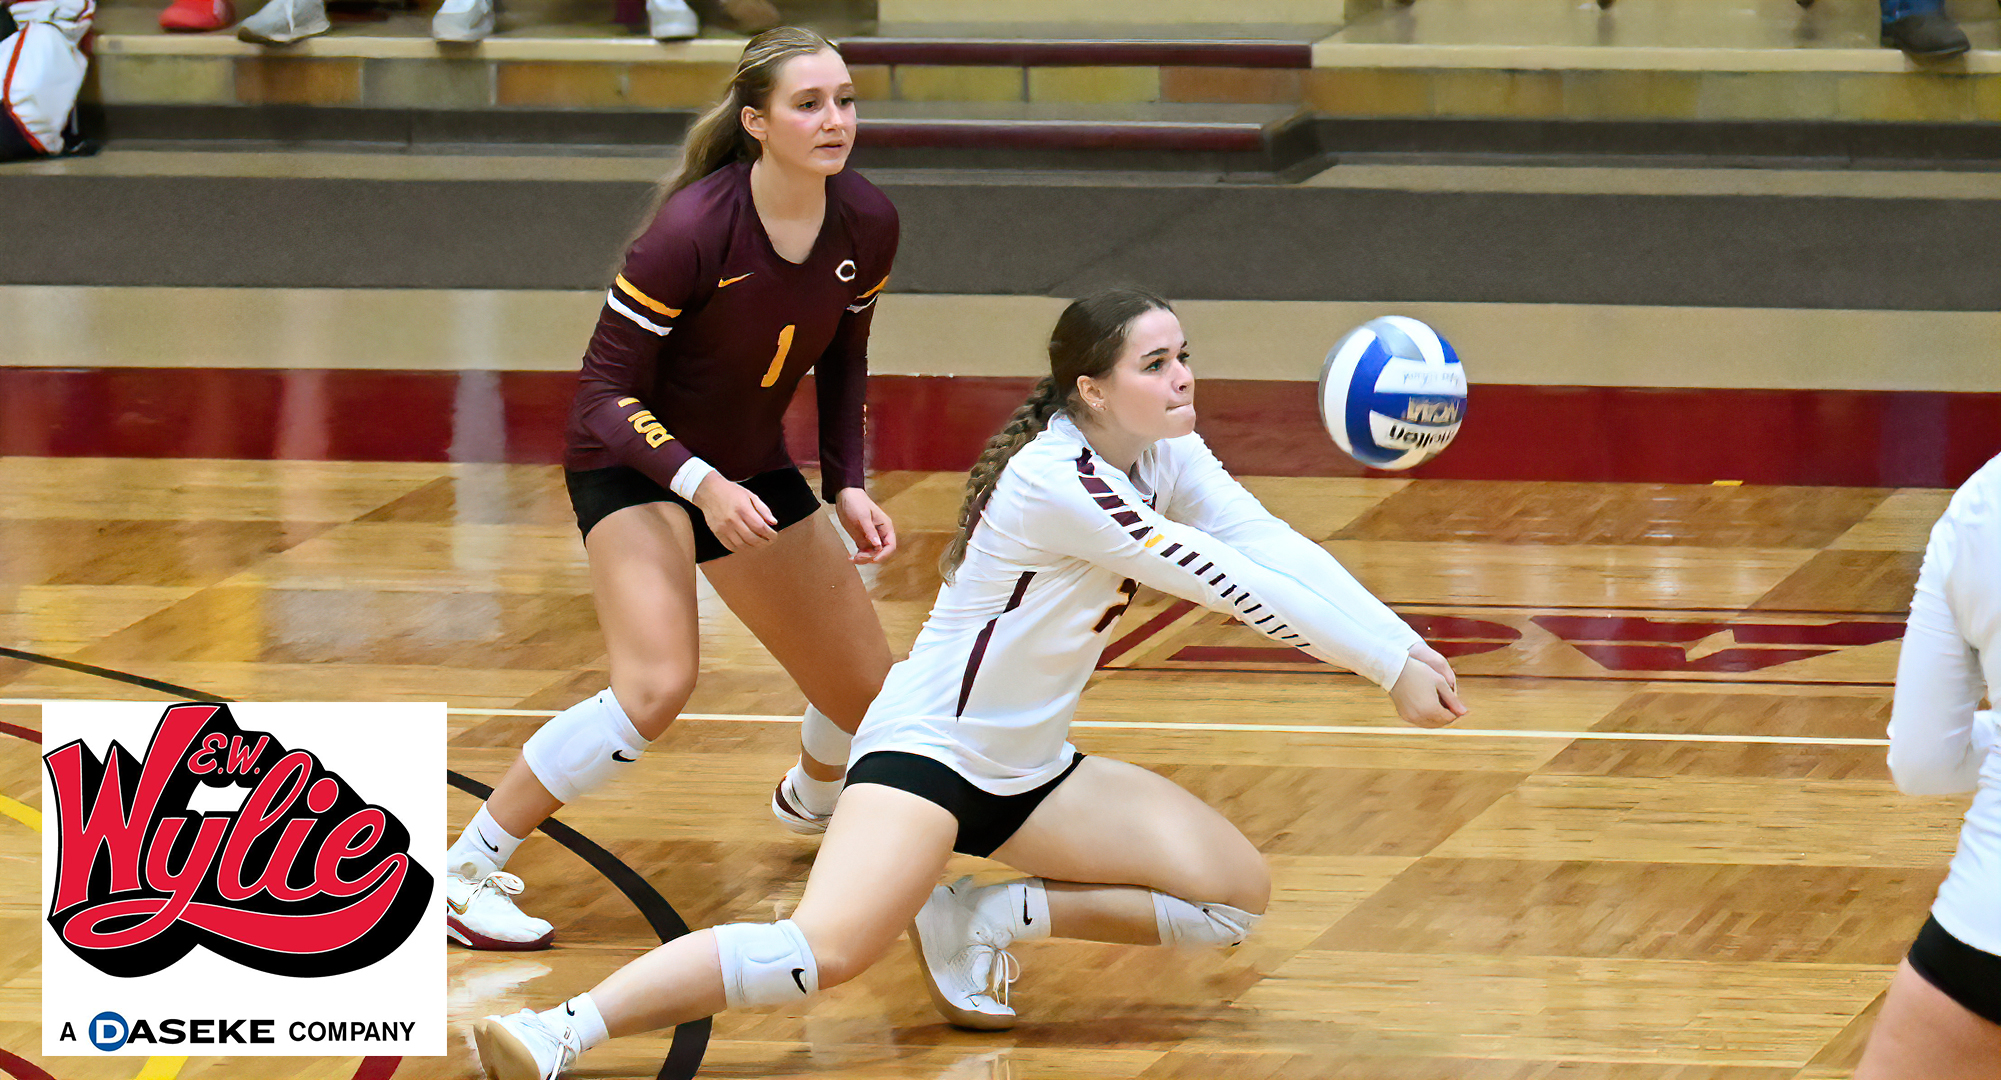 Hanna Mooney posted a team-high nine digs in the Cobbers sweep over Augsburg, which moved the team into a tie for third place in the MIAC.